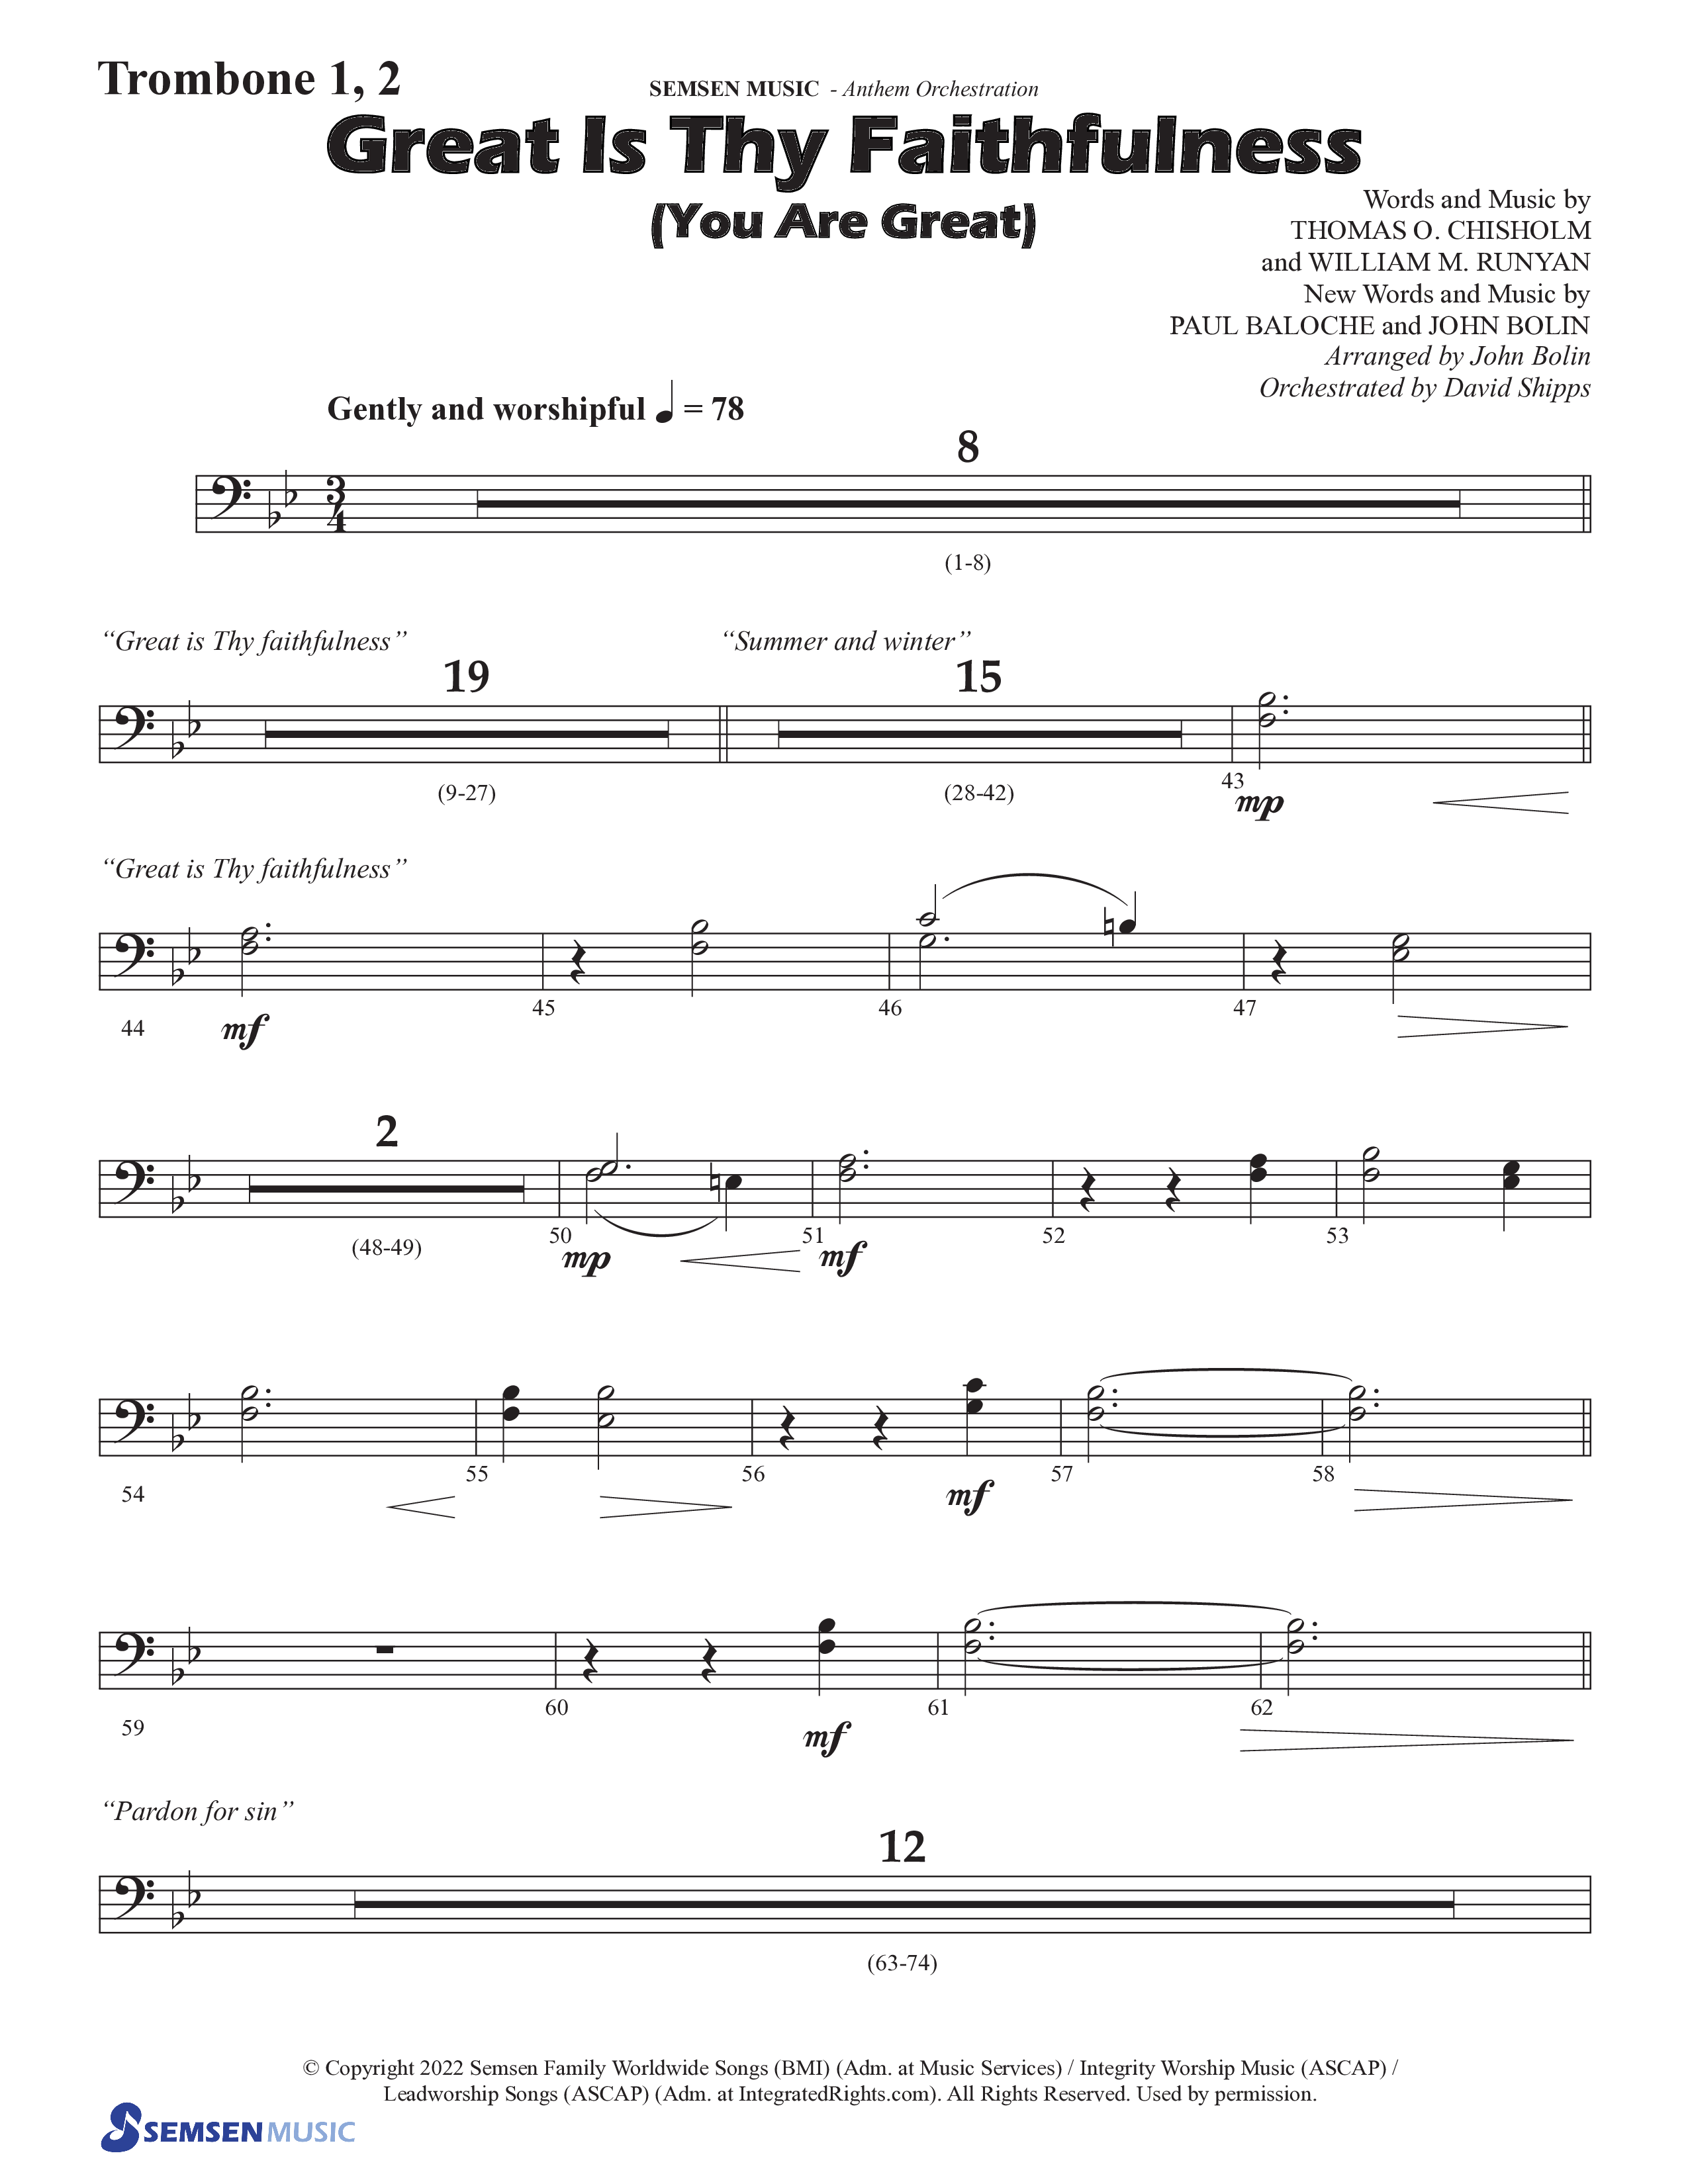 Great Is Thy Faithfulness (You Are Great) (Choral Anthem SATB) Trombone 1/2 (Semsen Music / Arr. John Bolin / Orch. David Shipps)